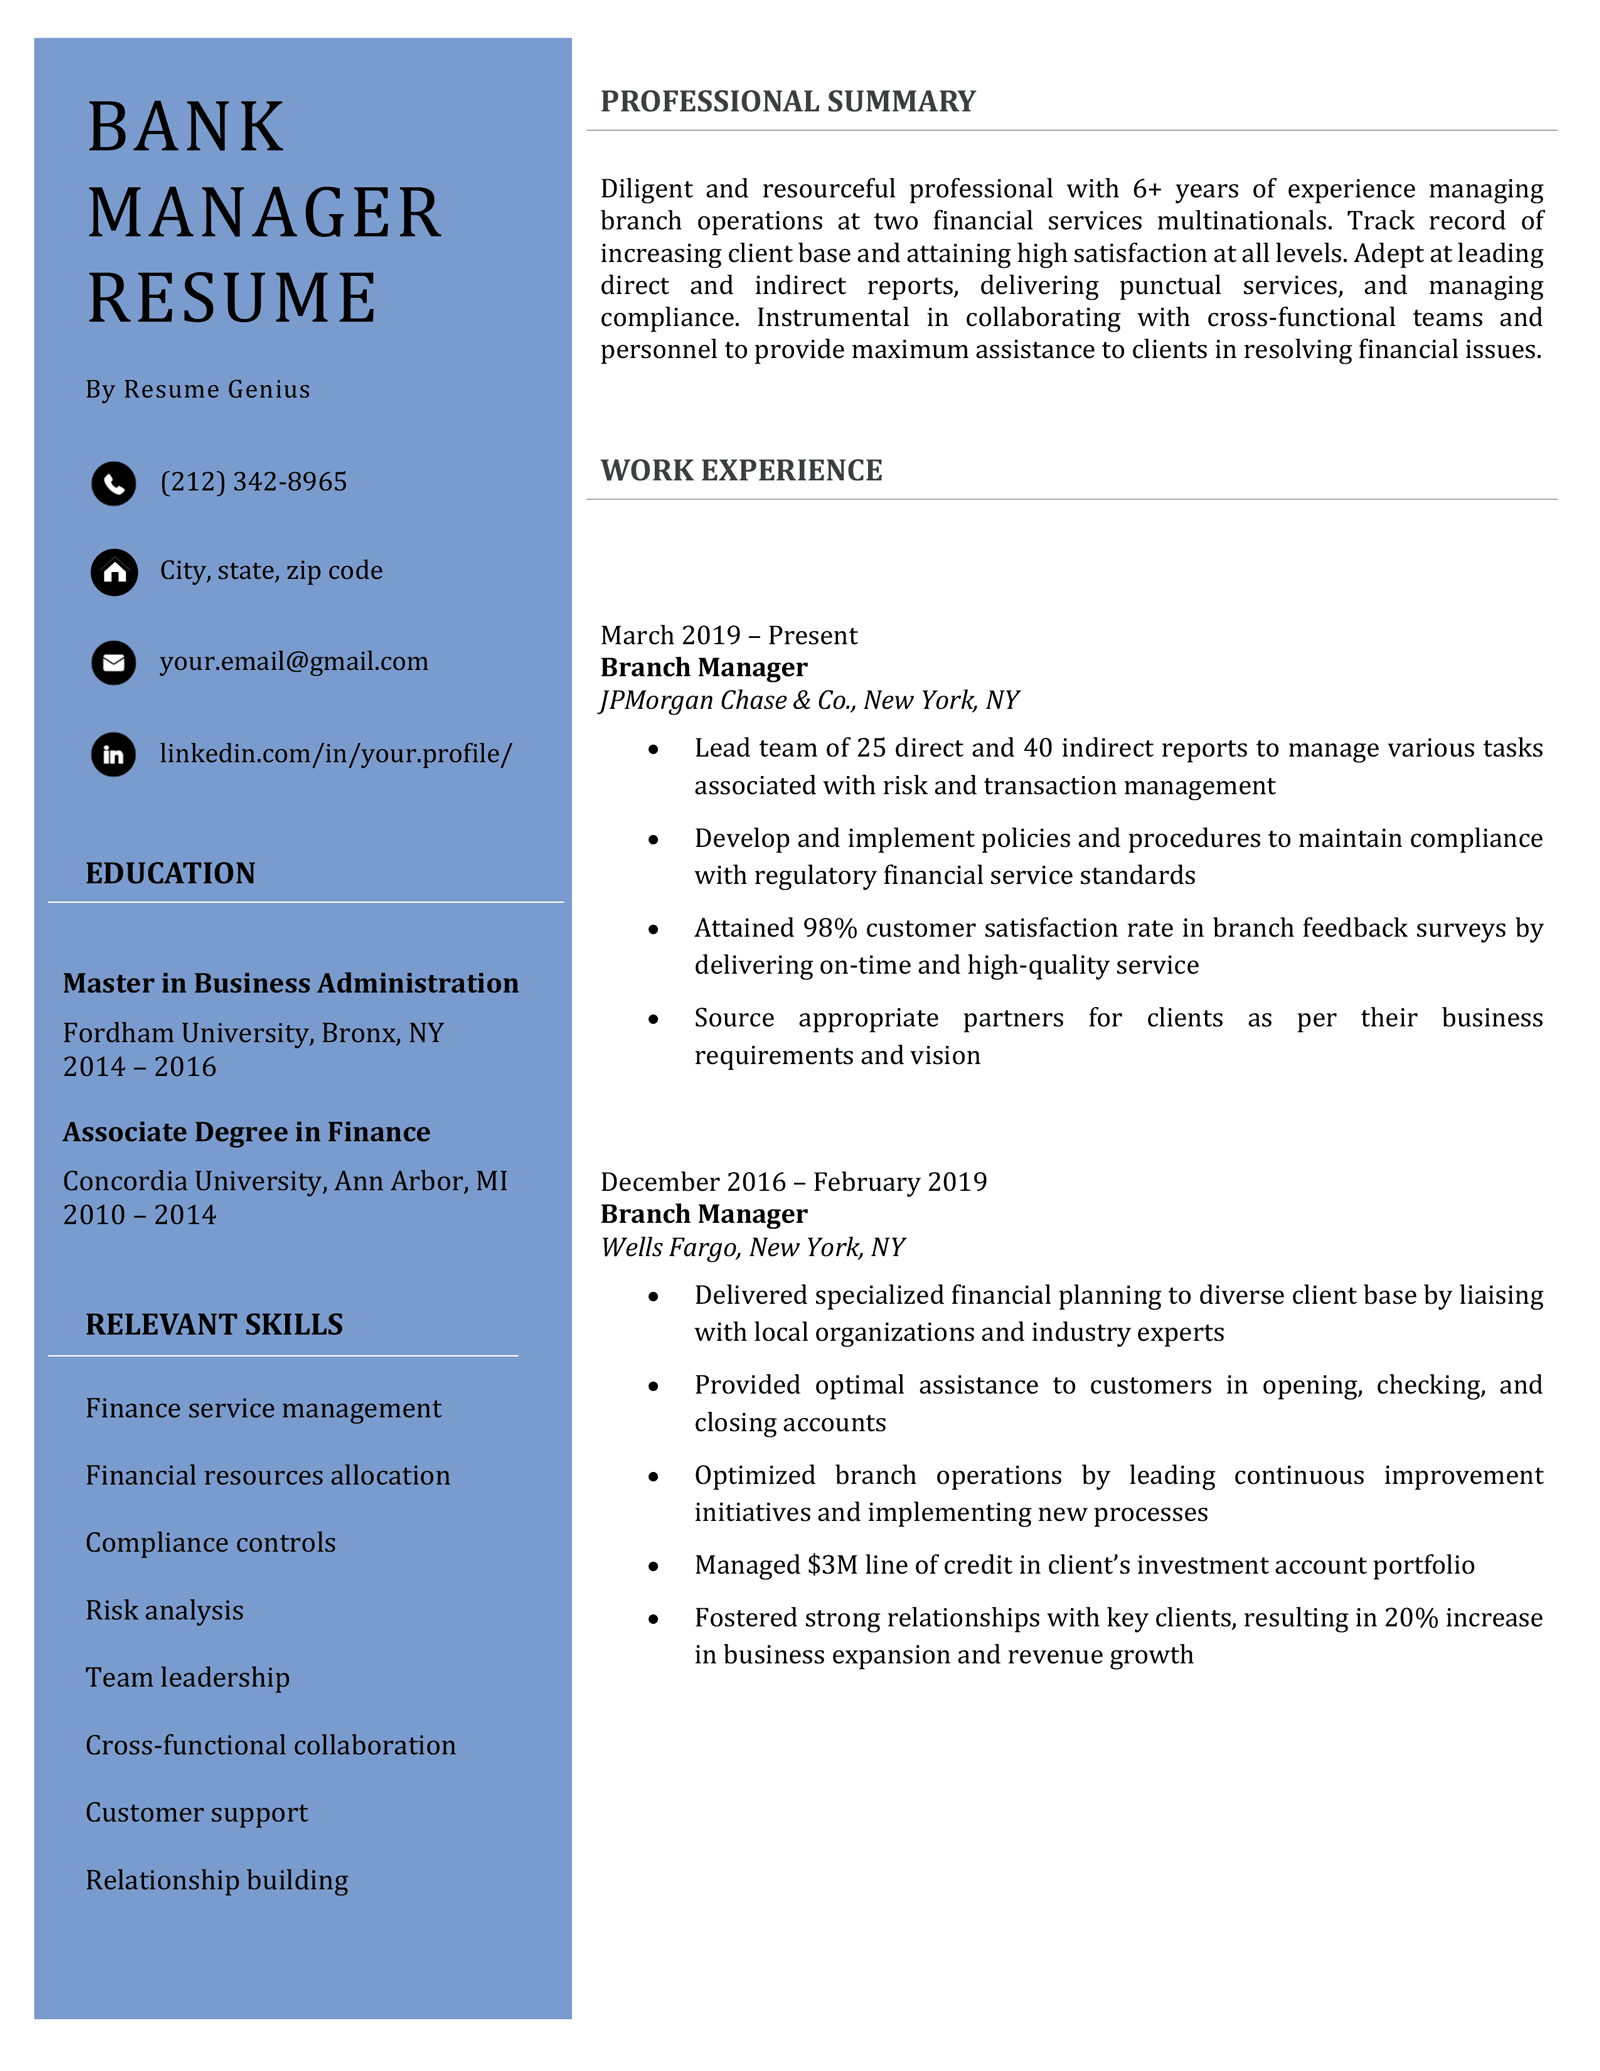 A bank manager resume example in blue with a two-column layout and prominent resume icons used for the contact details section.